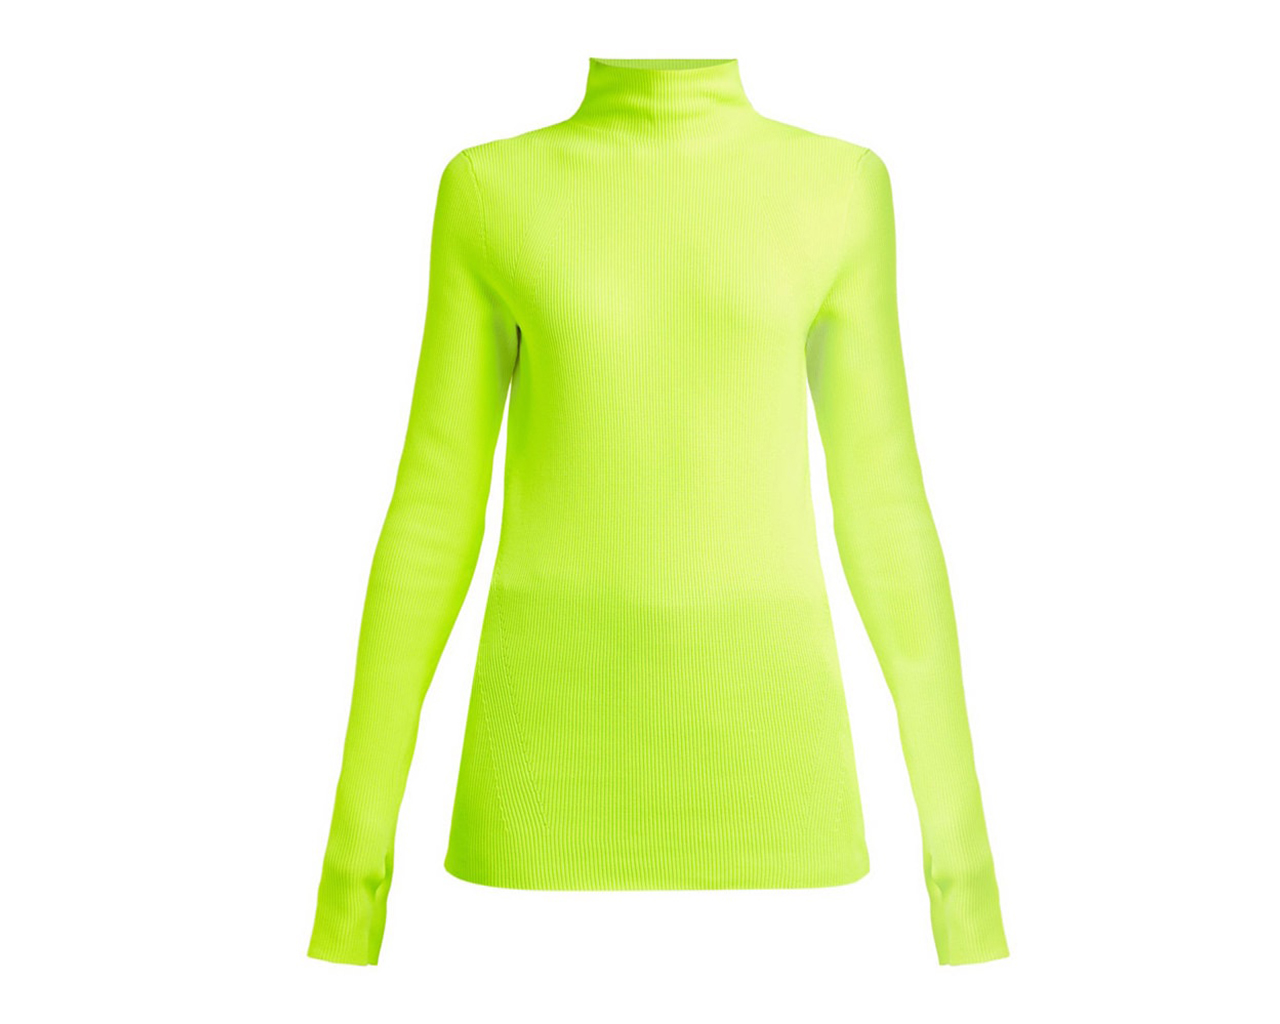 Shop-able neon sweaters